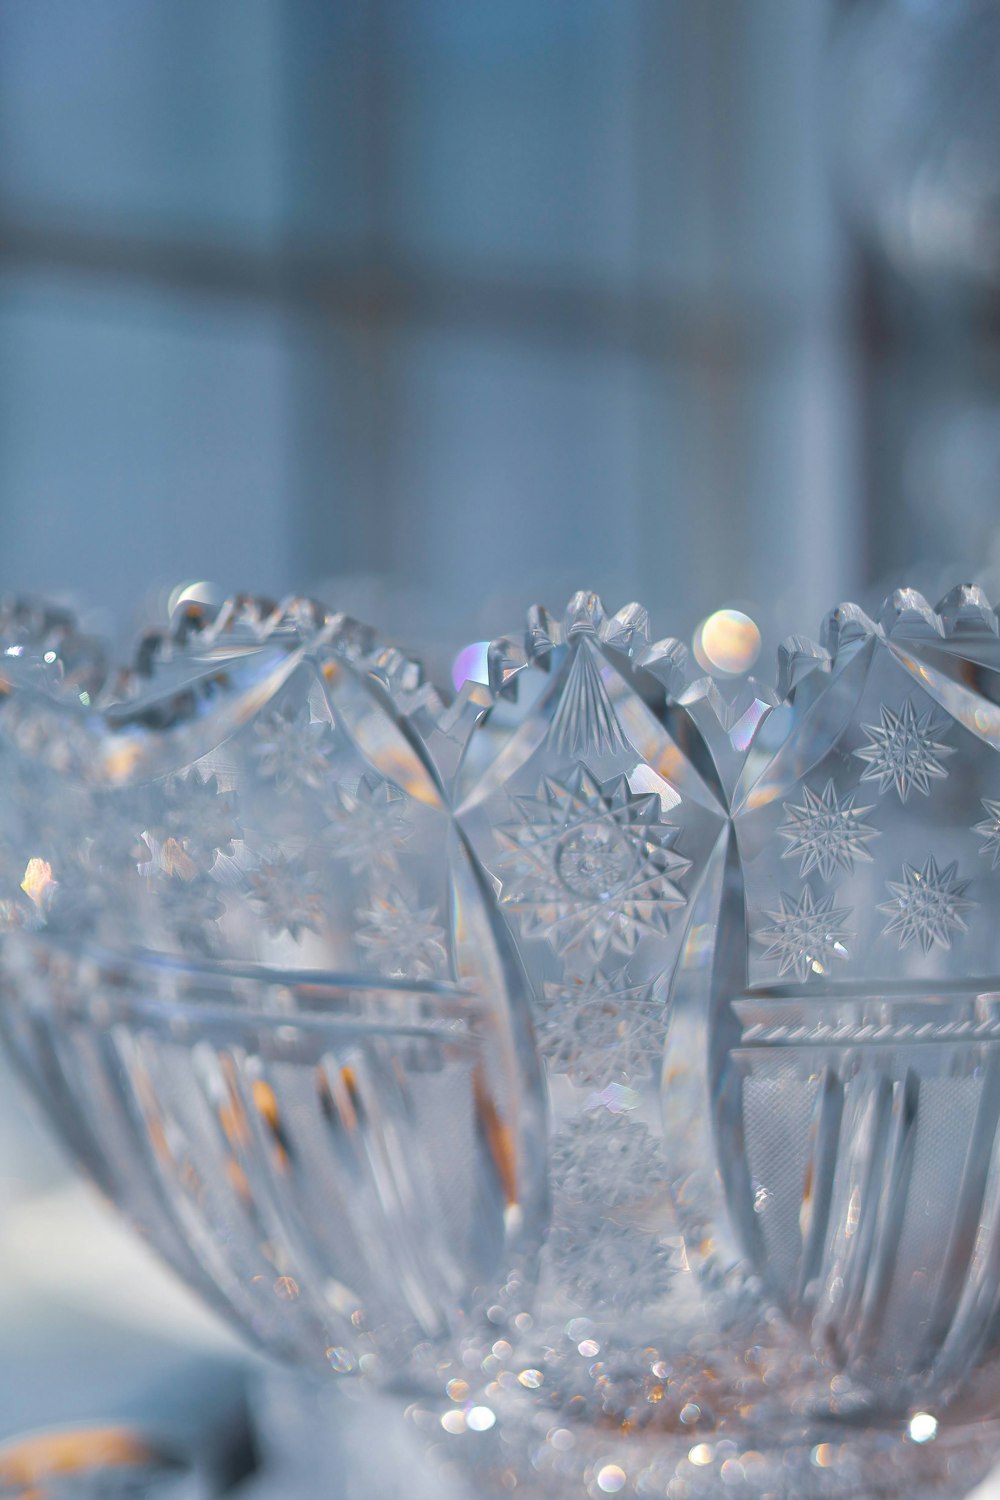 a close up of a glass bowl with snowflakes on it